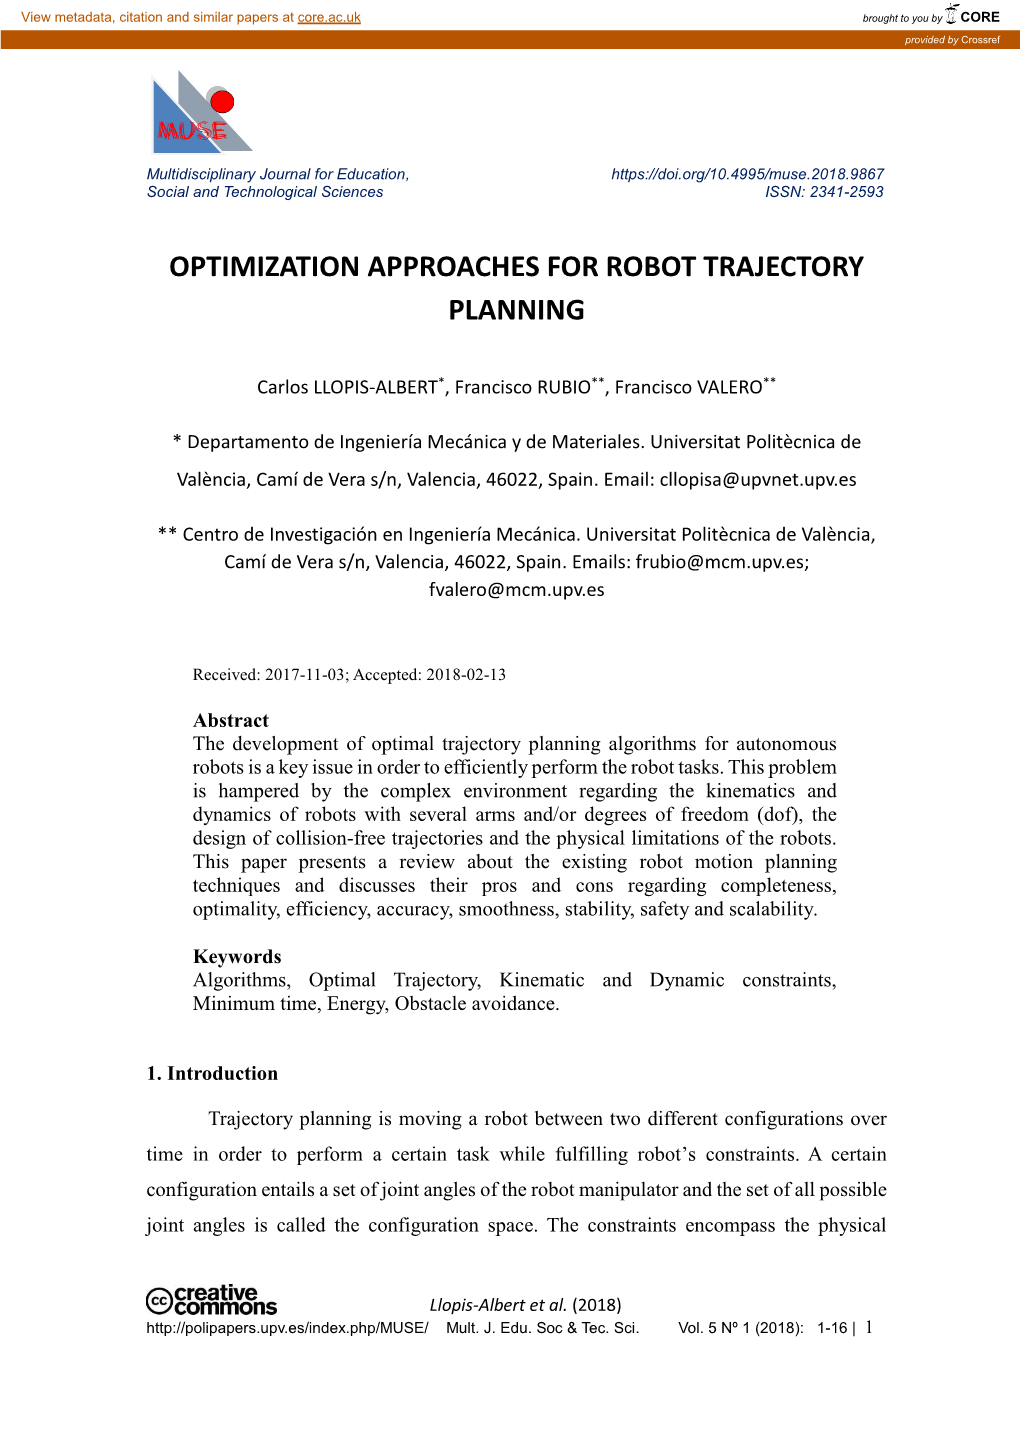 Optimization Approaches for Robot Trajectory Planning